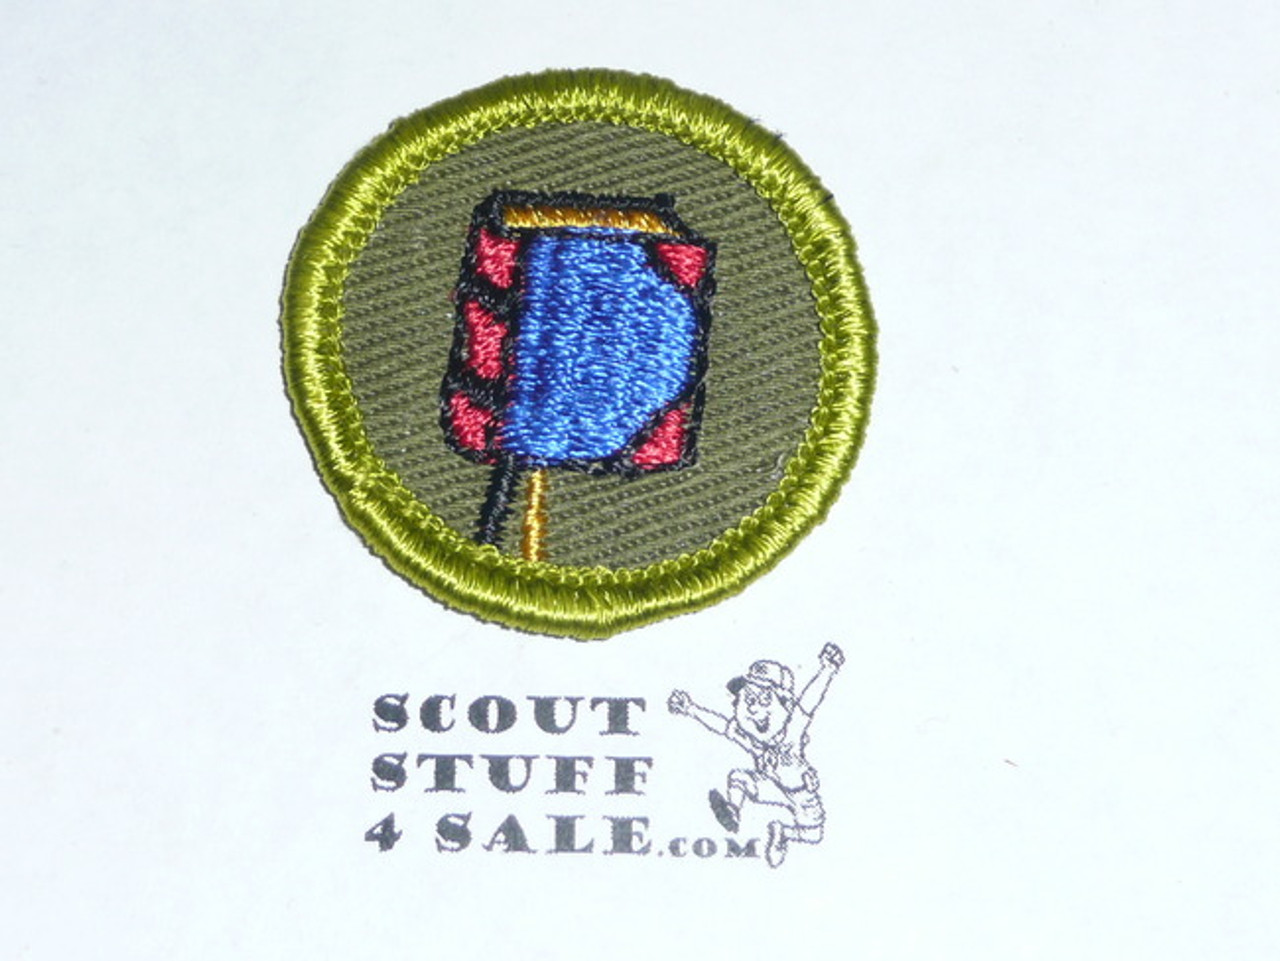 Bookbinding (with ribbon) - Type F - Rolled Edge Twill Merit Badge (1961-1968)